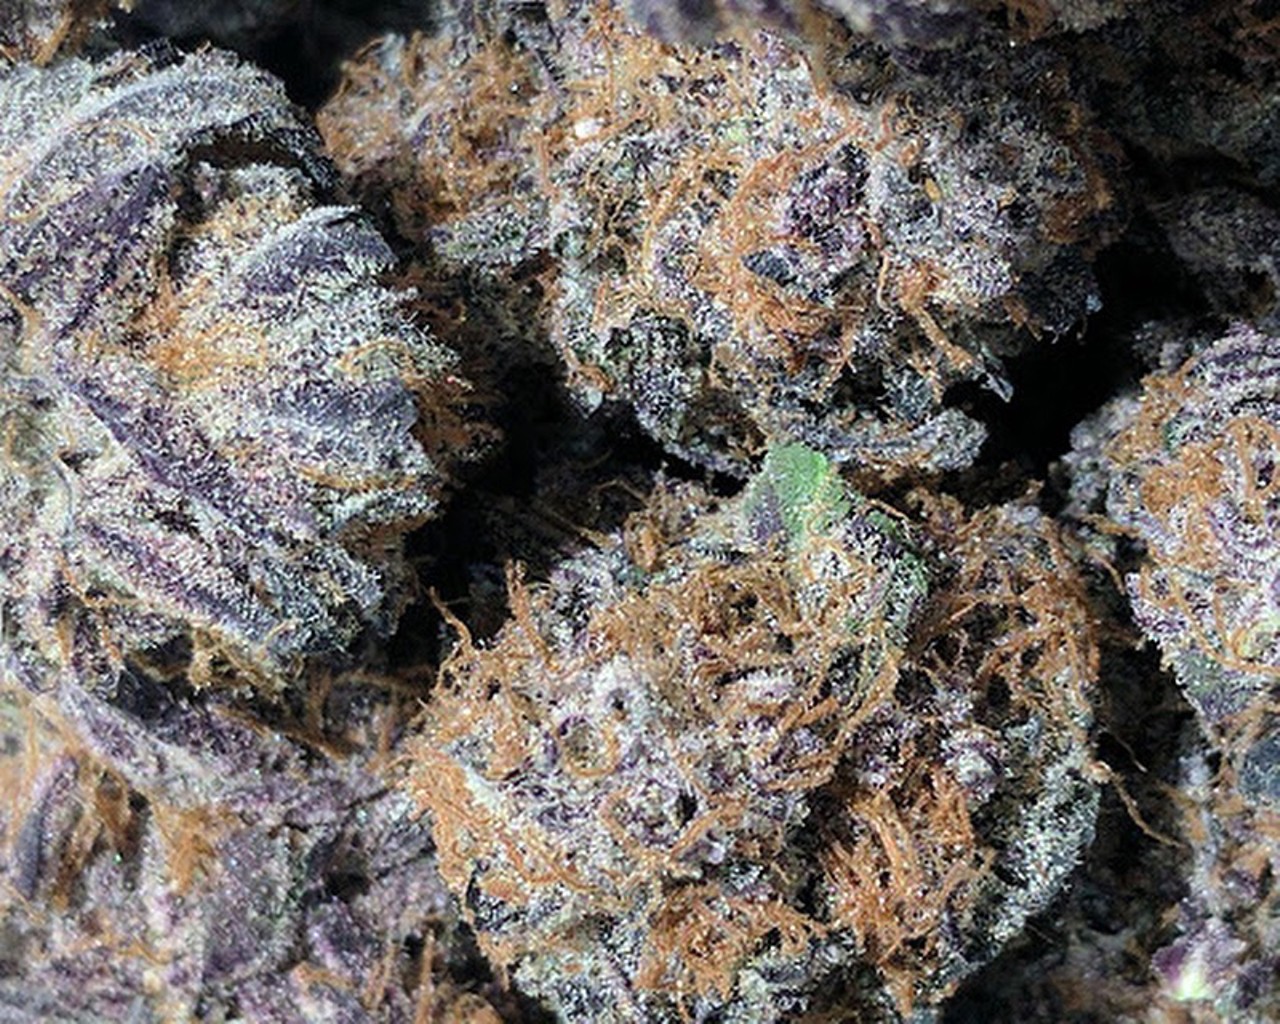 People's Choice
Black D.O.G.
Derived from the cross of two classic northern Californian strains: Blackberry Kush and Emerald Headband, this Indica dominant hybrid showcases a really intense mixture of flavors and aromas, with notes of grapes, berries and oil. Its initial cerebral effect, finishes with a strong, yet relaxing couch locking body high. Black D.O.G. is beneficial for patients with chronic pain, migraines, poor appetite and insomnia.
2247 W. Liberty St., Ann Arbor; peopleschoiceofannarbor.com; 734-369-8573. 